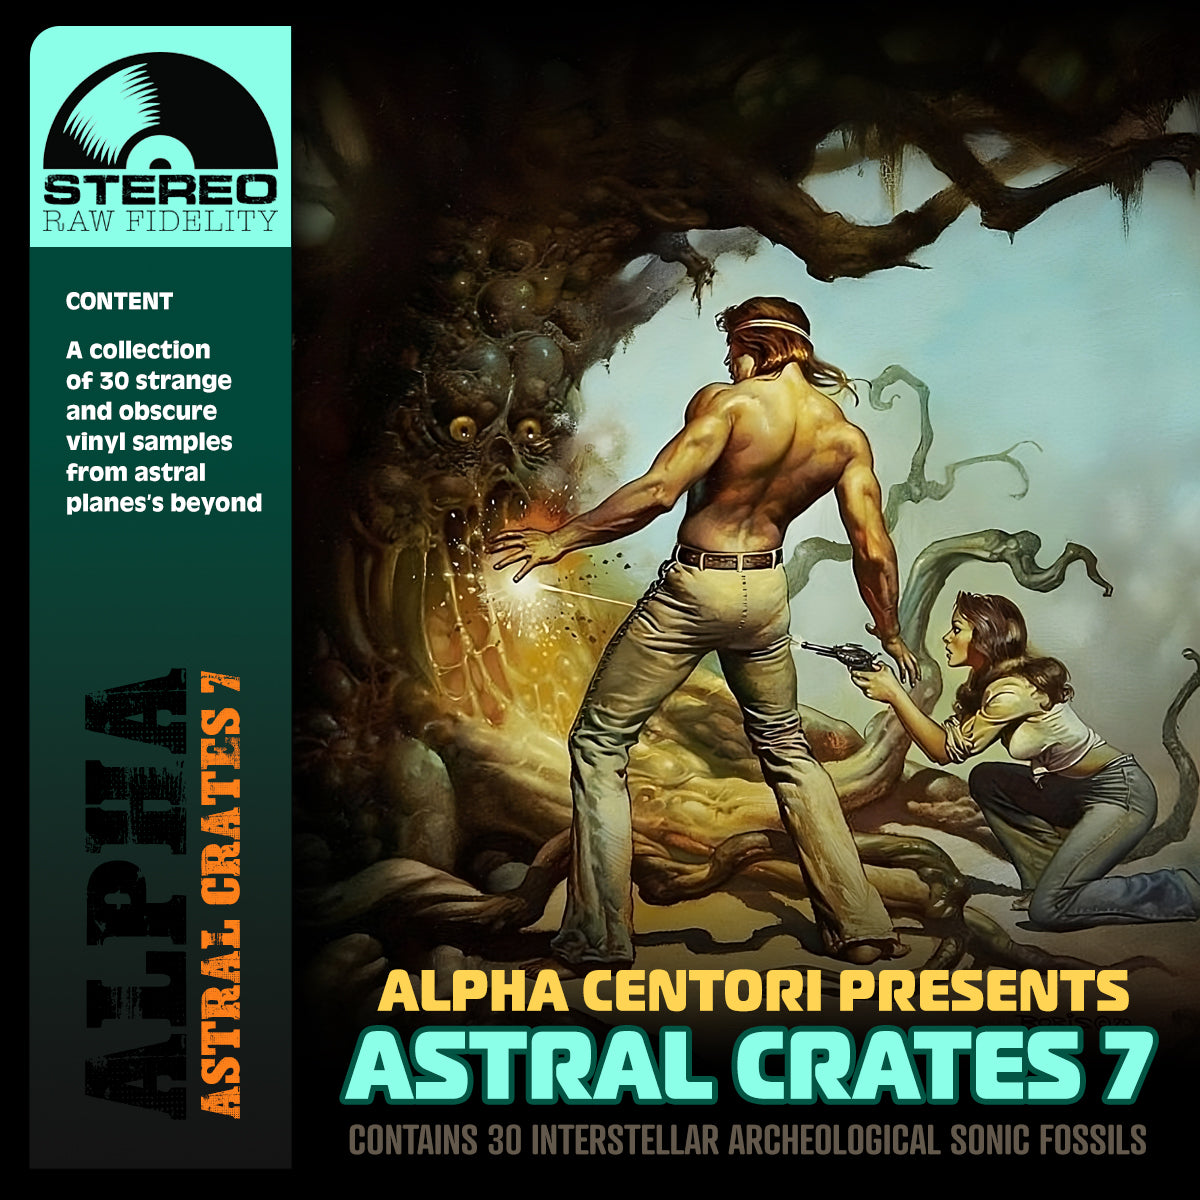 Astral Crates 7